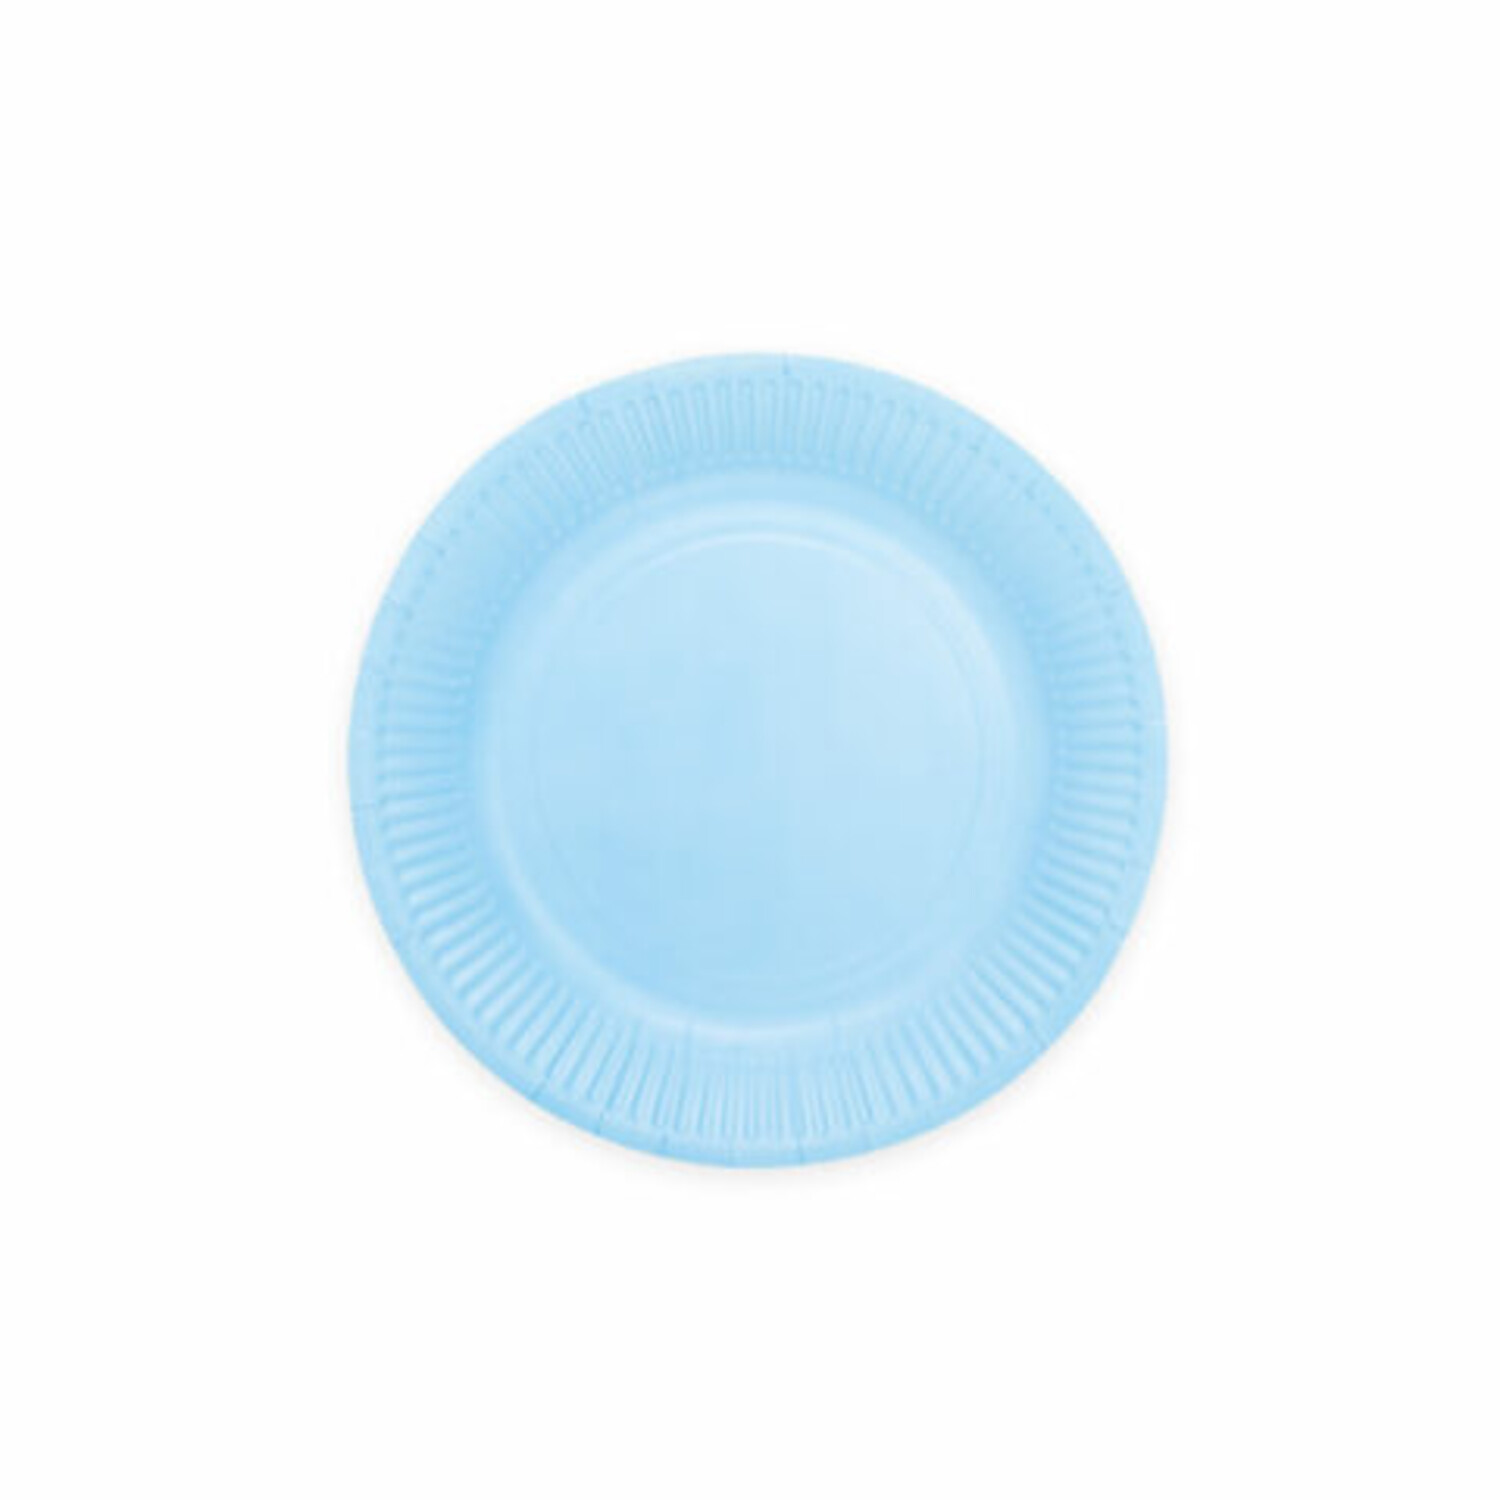 Buy blue Available Toys from Treats and - Supplies, Party stock Tuf-Tuf plates? | ✓